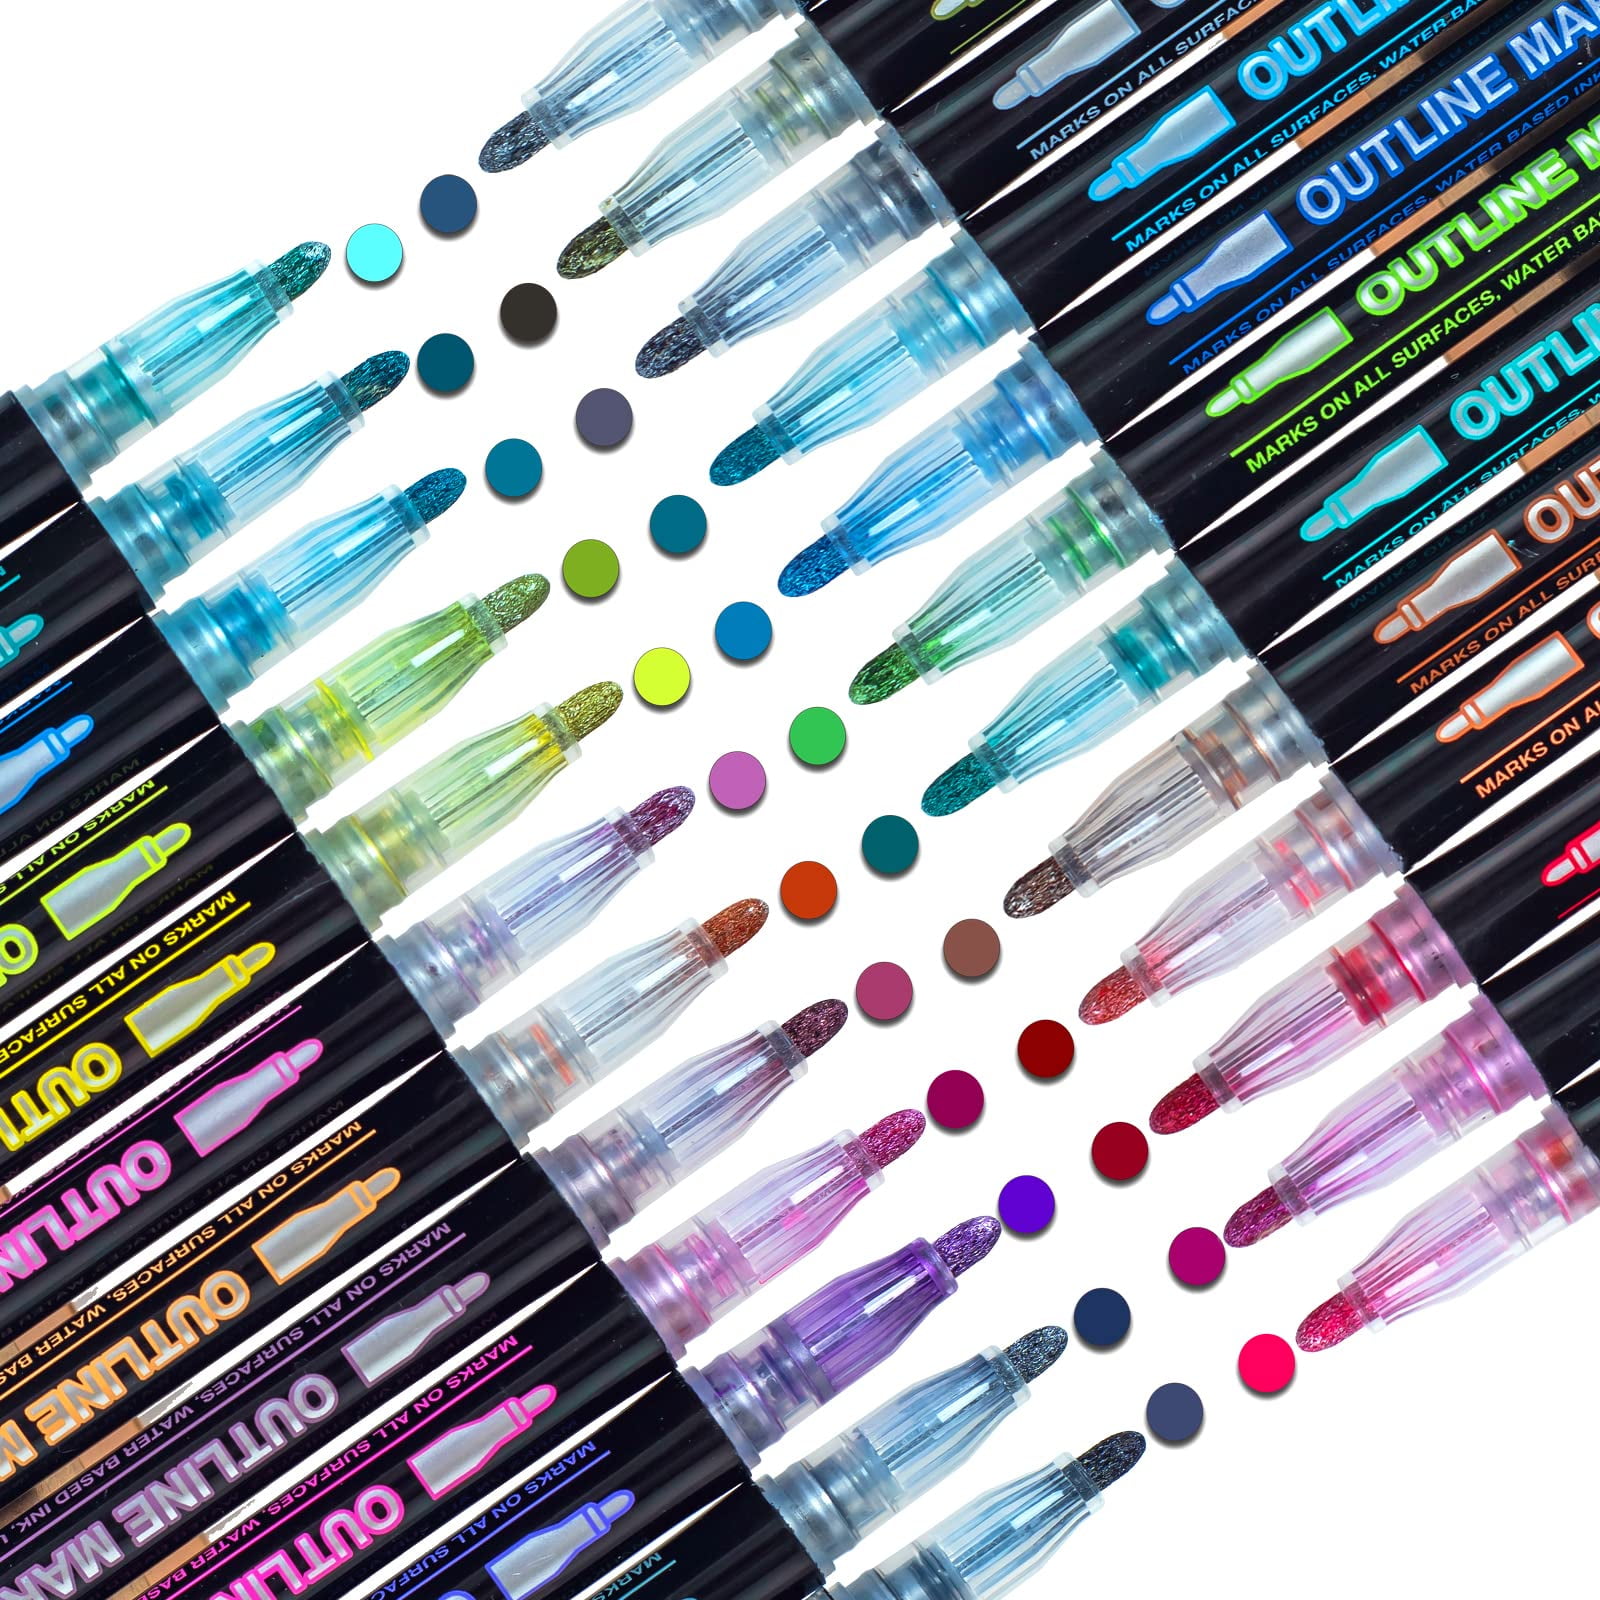 SGDZVD Outline Metallic Markers, Doodle Glitter Markers for Kids, Super Squiggles Colored Pens for Writing Journal & Drawing, Paint Markers for DIY